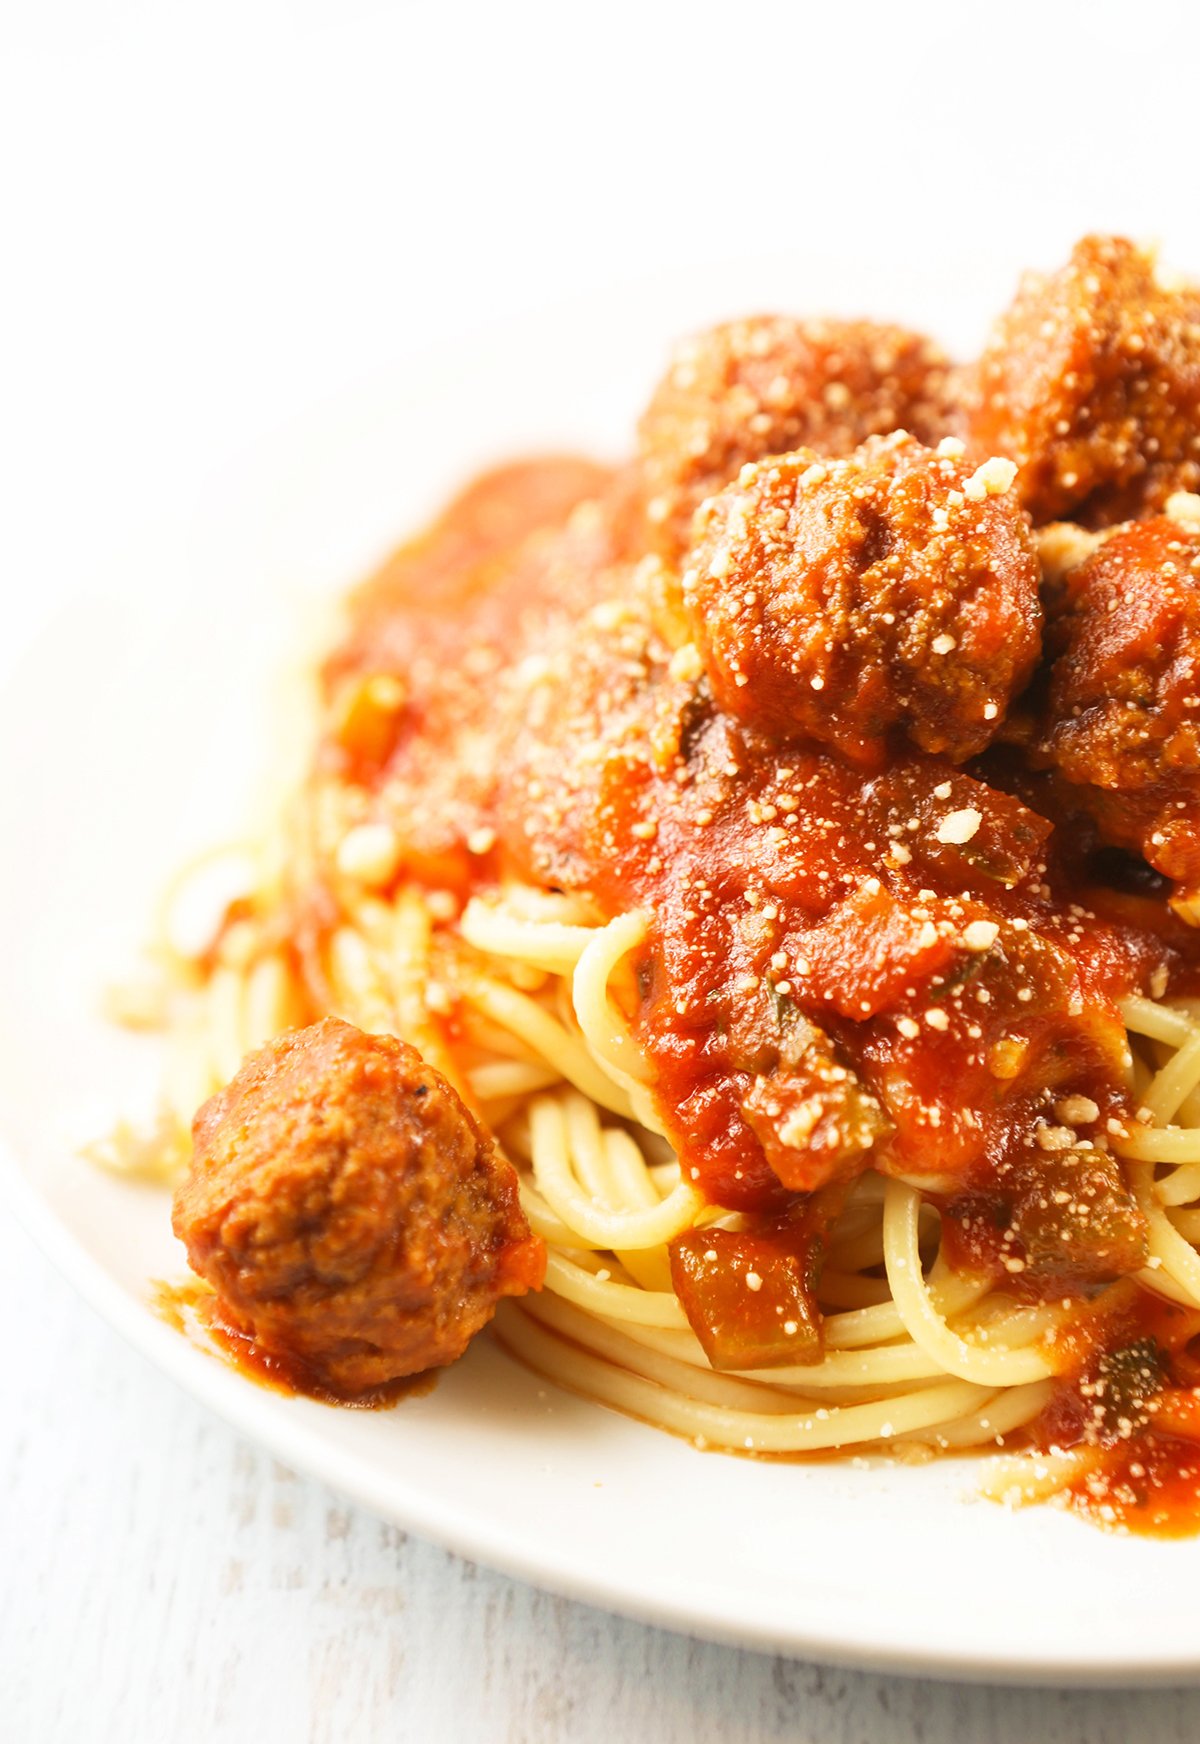 Huge pile of spaghetti and meatballs on a plate, topped with grated parmesan cheese.